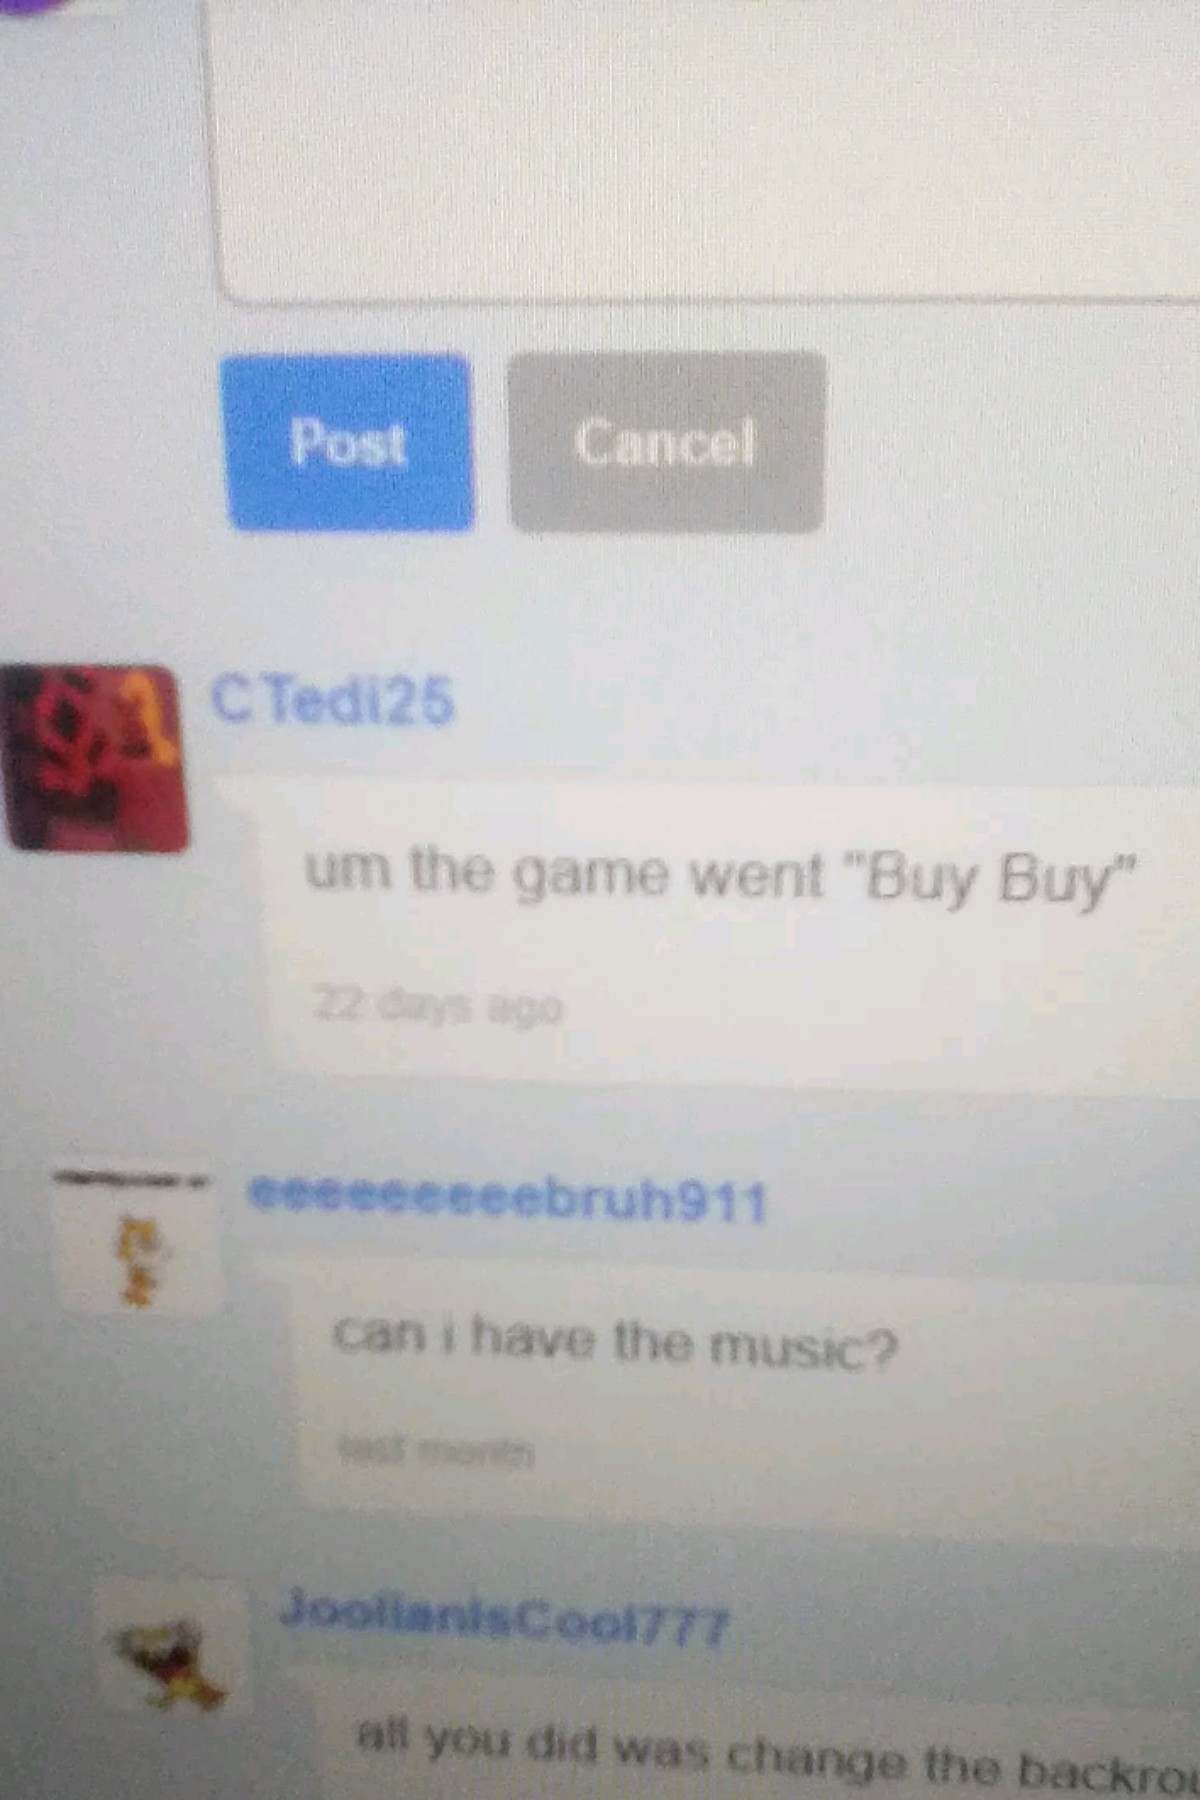 Funny comment i found on Scratch a few days ago